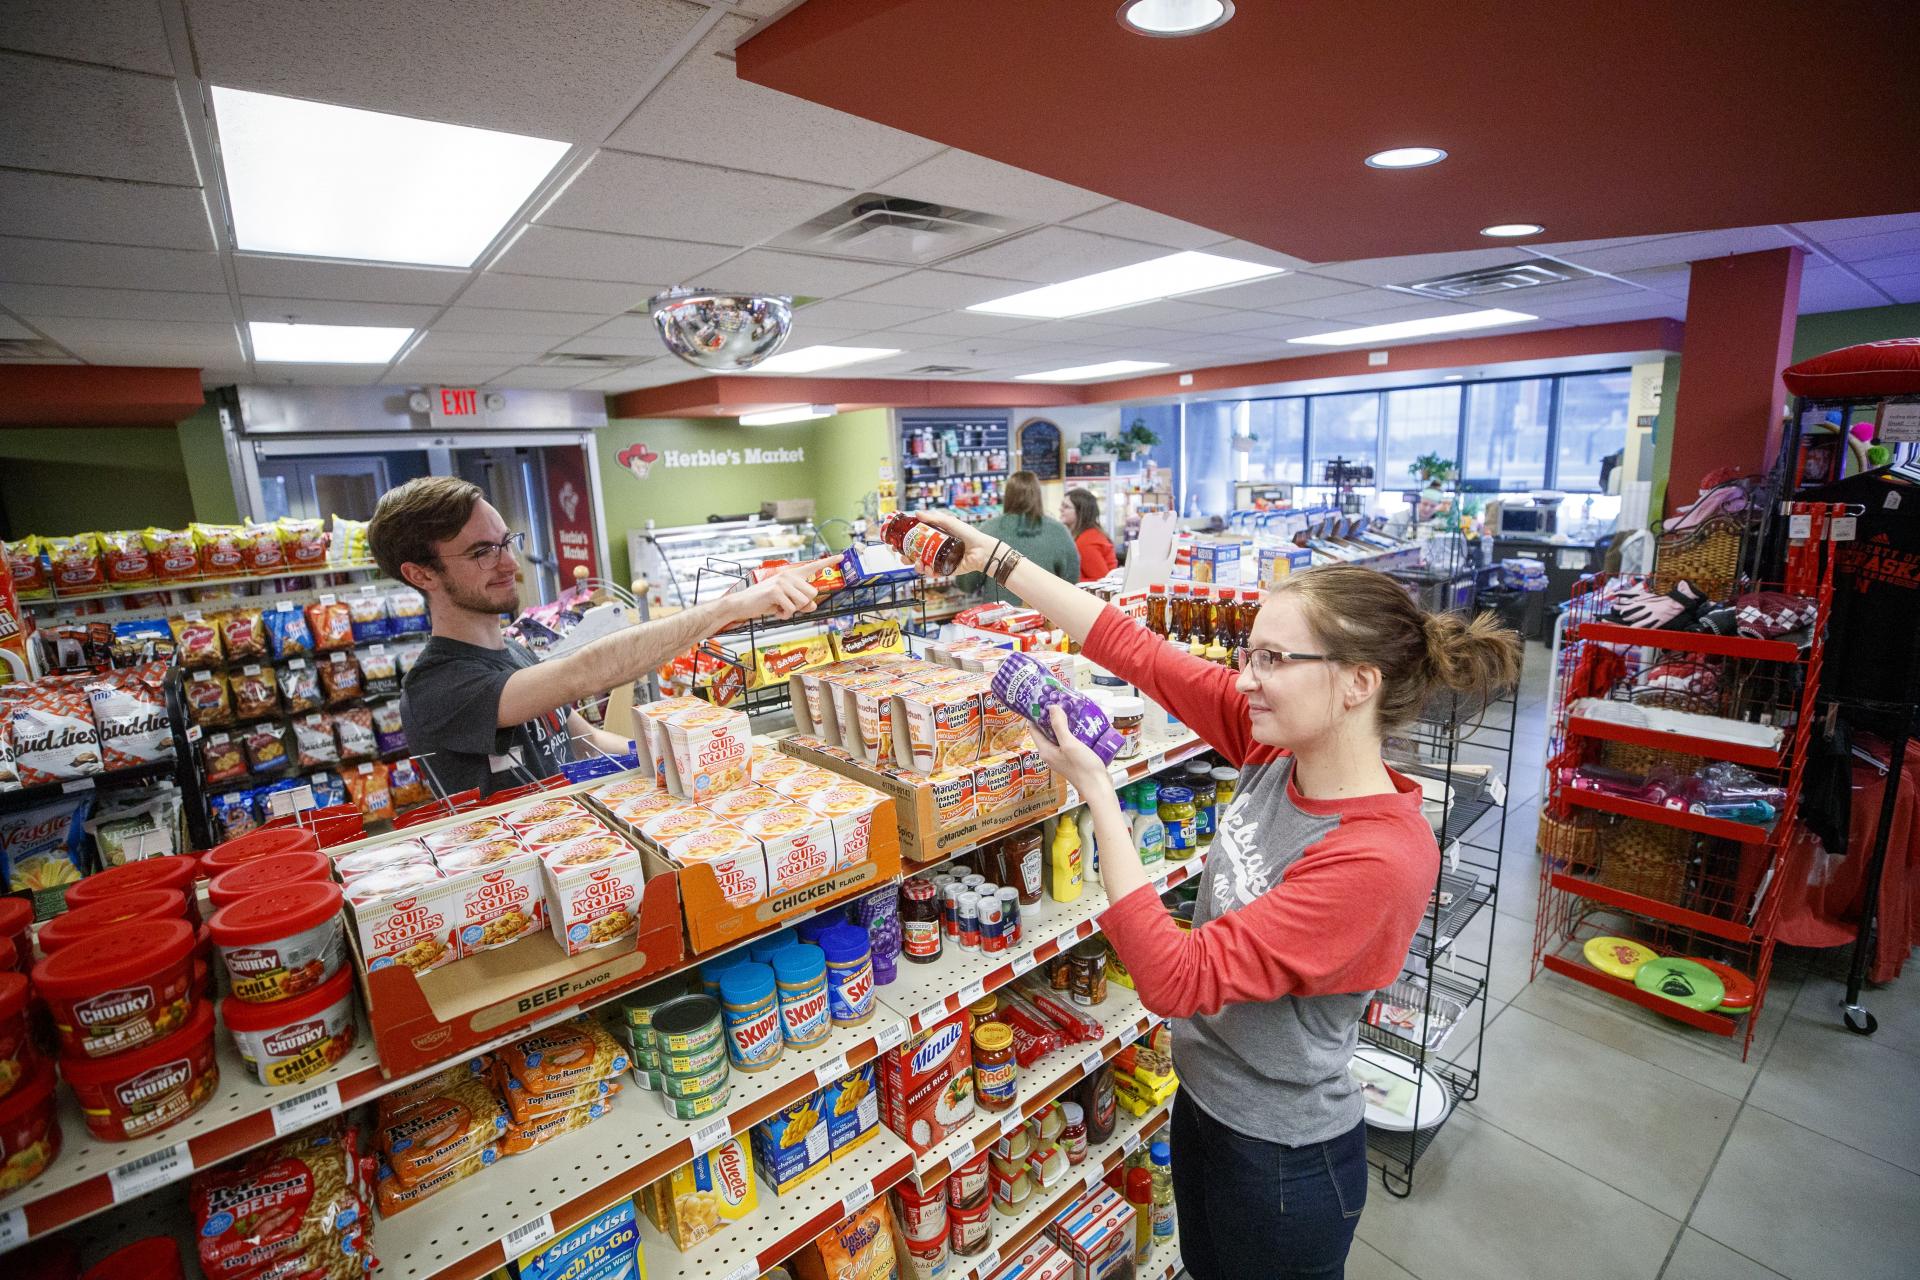 Students pass items across the shelf in Herbie's Market at Village